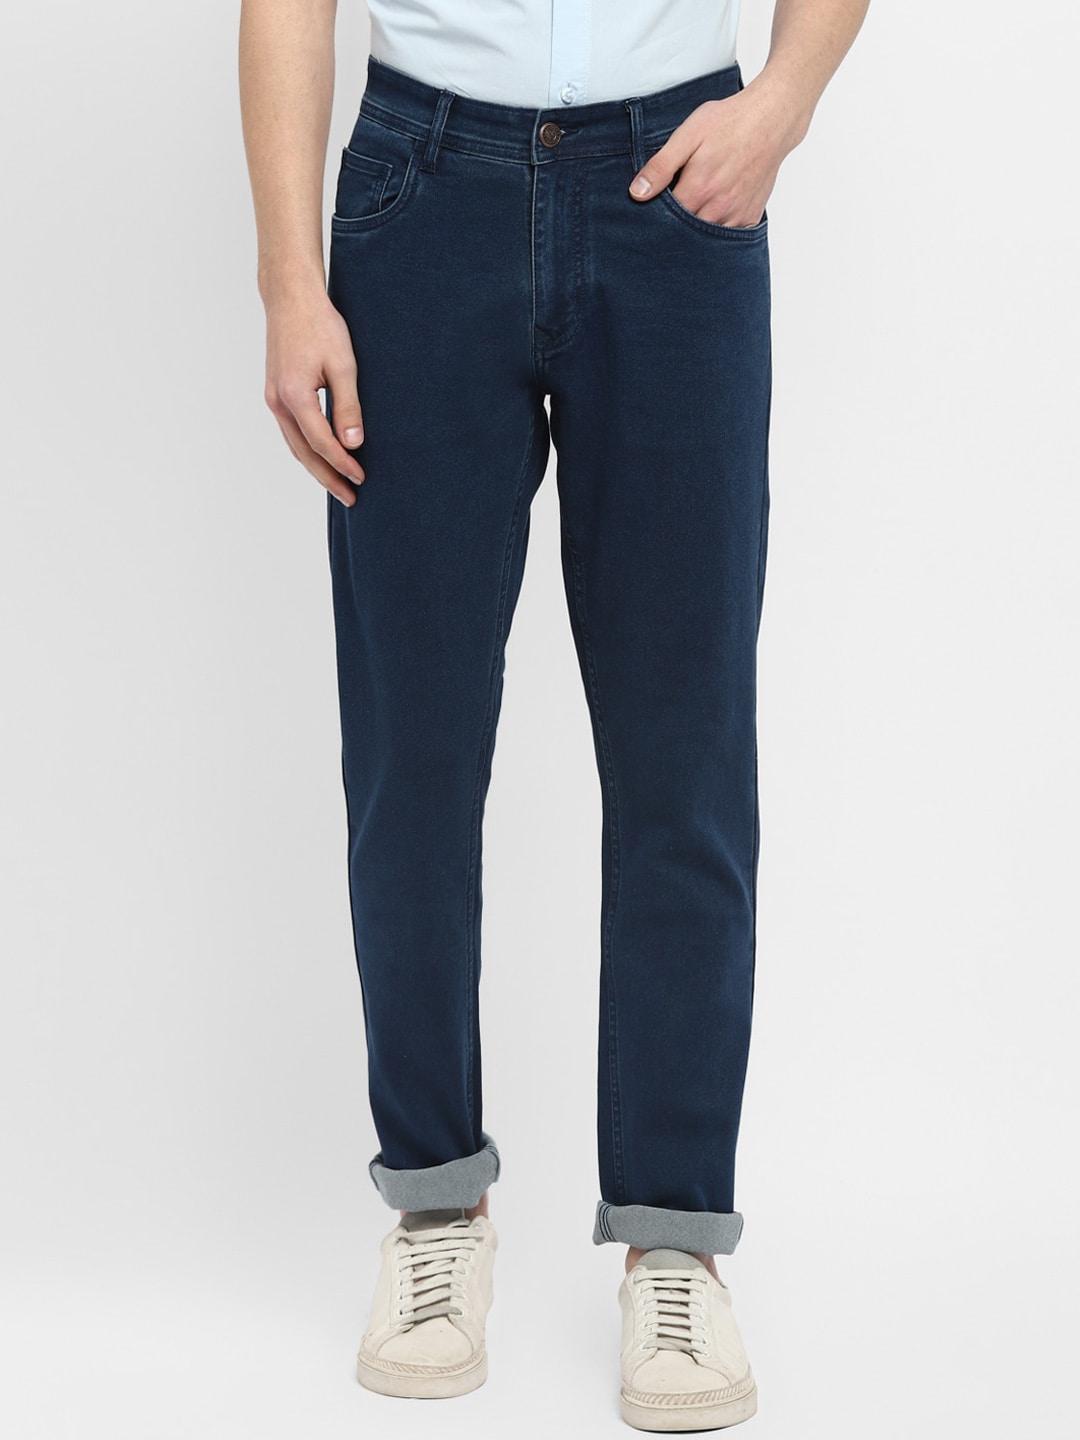 red-chief-men-blue-stretchable-jeans